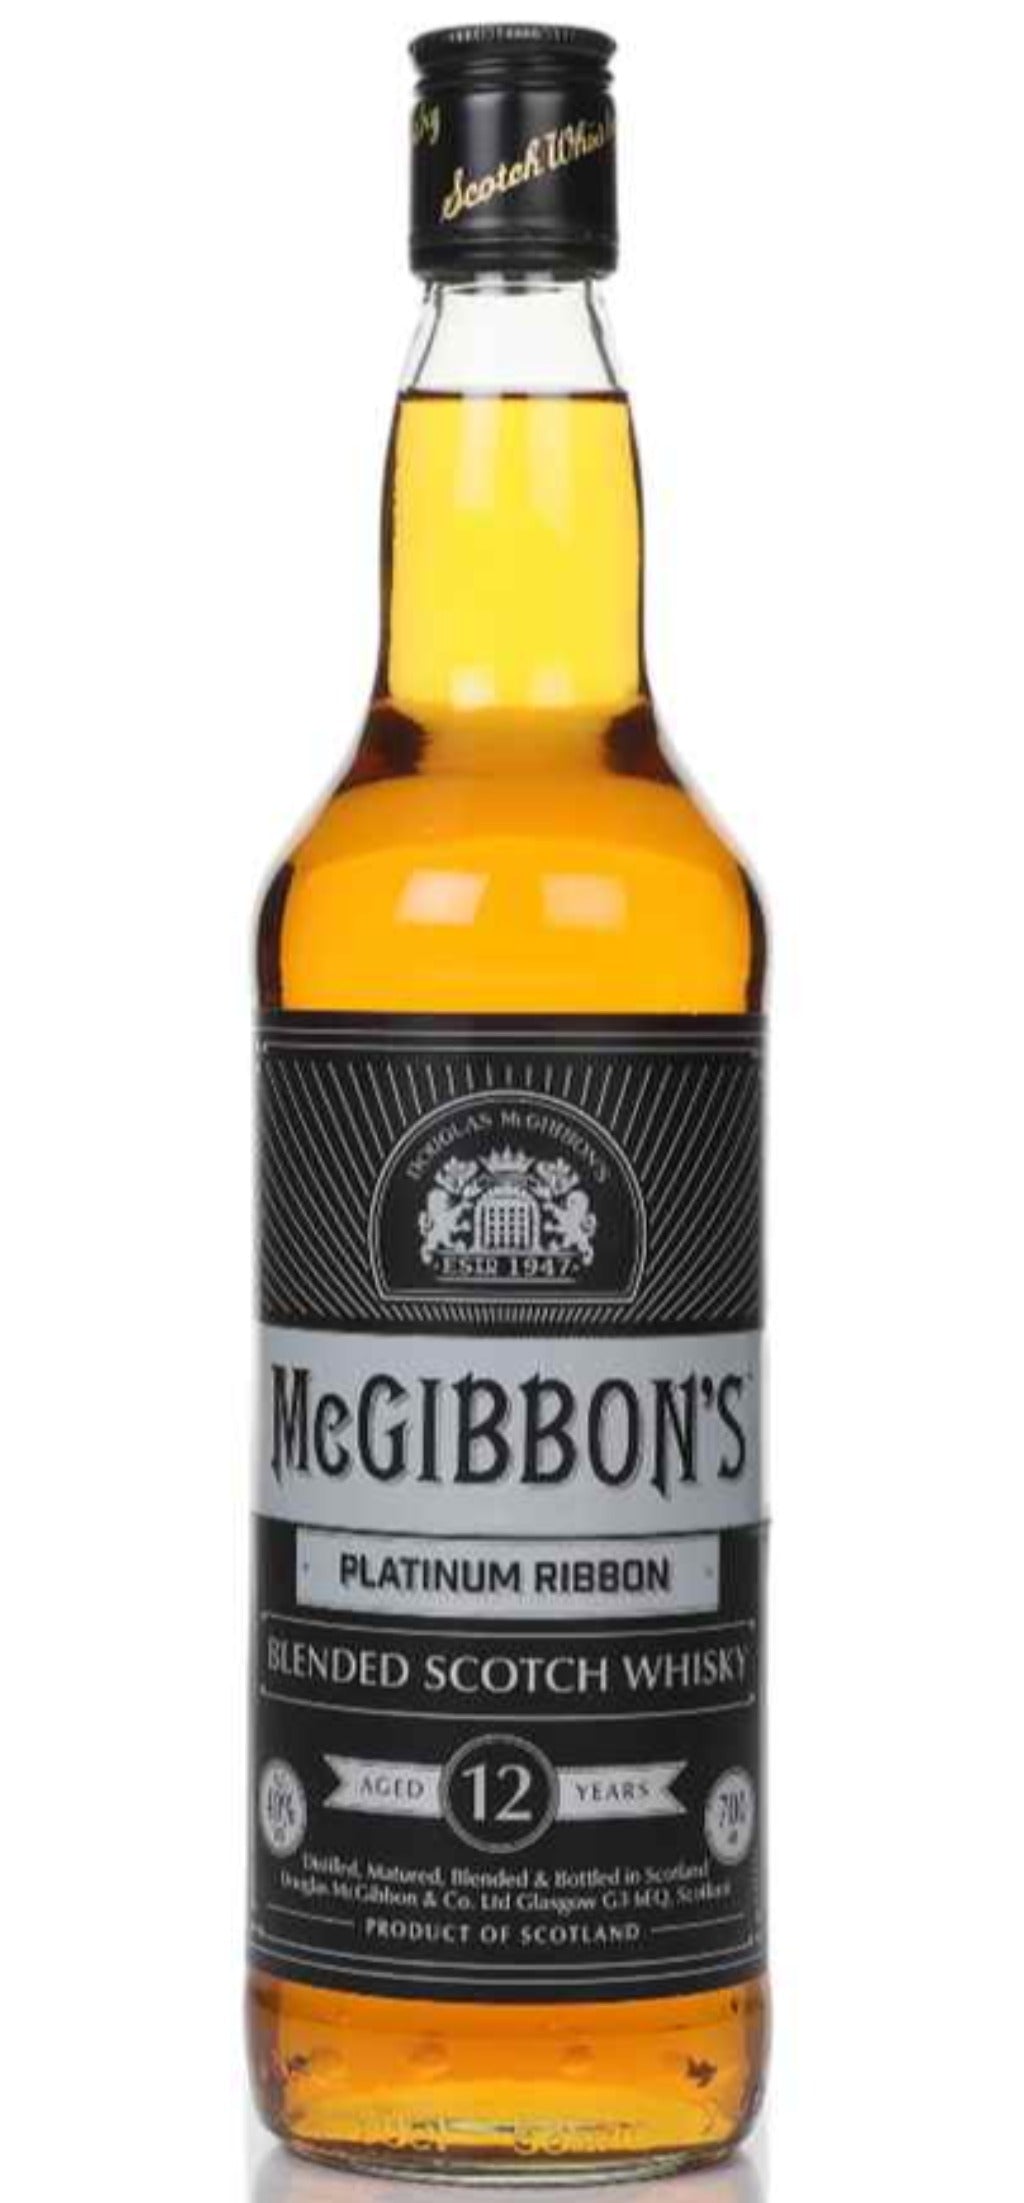 McGibbons Platinum Ribbon 12 Year Old Blended Scotch Whisky